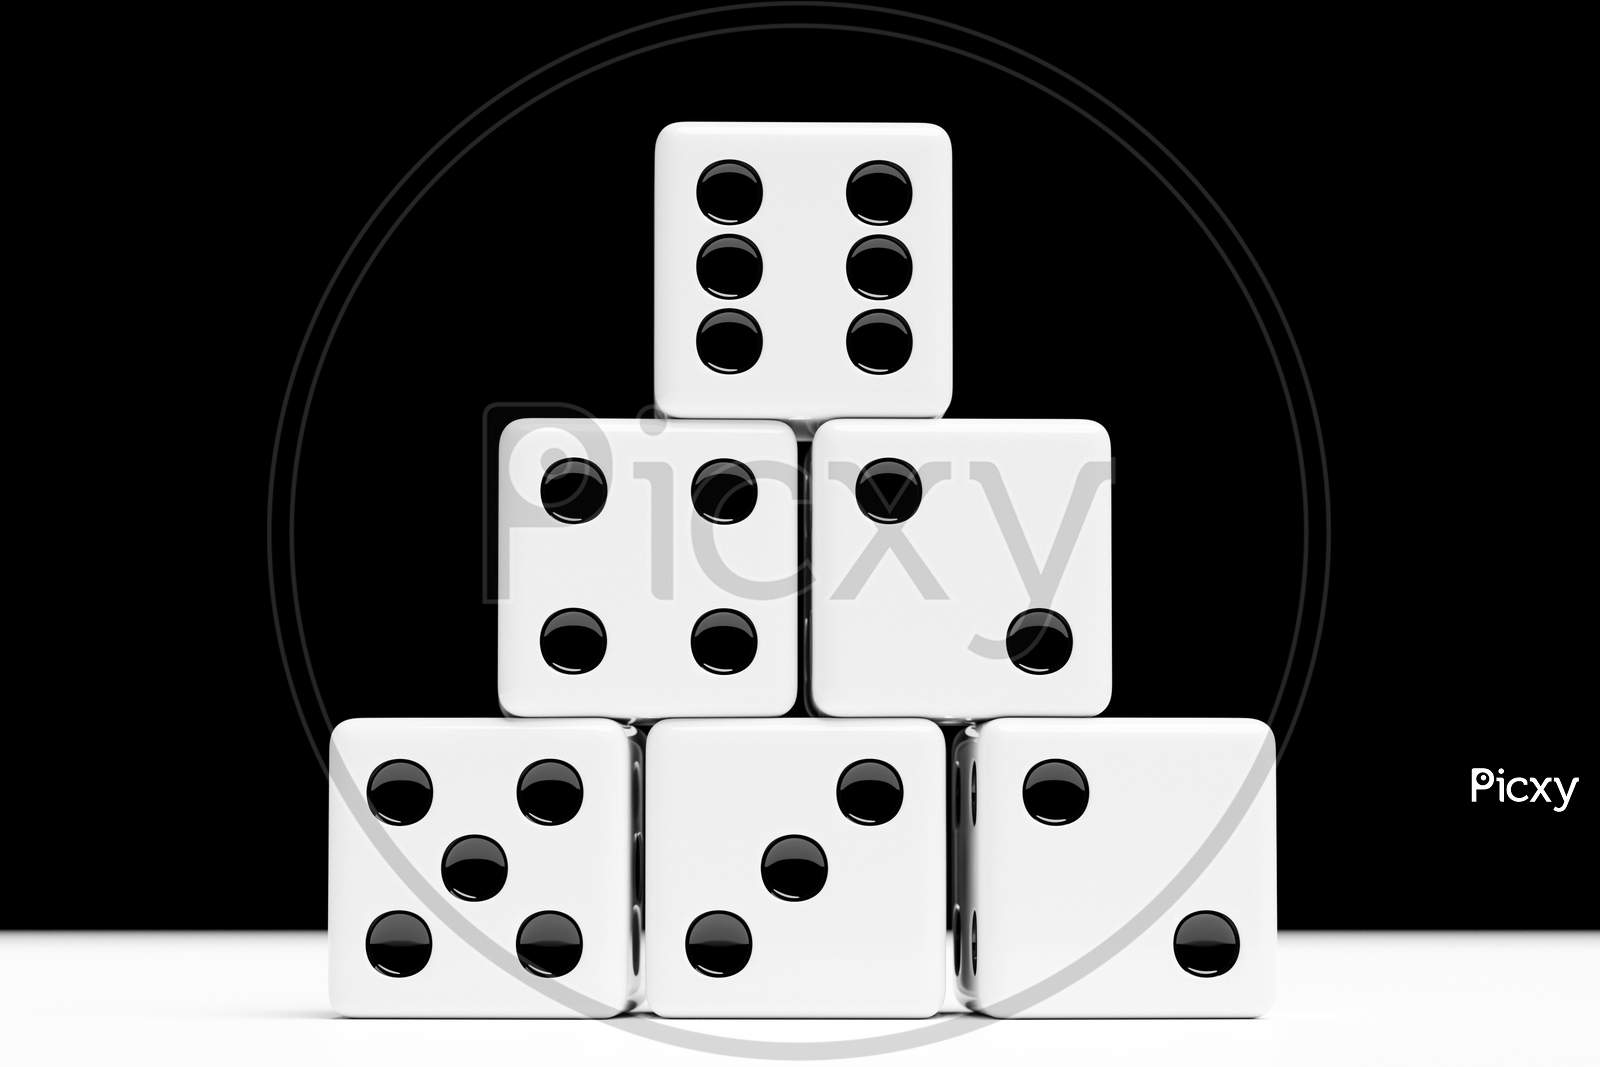 3D Illustration Set Of Game Dice, Isolated On Black Background. Dice Design From One To Six.